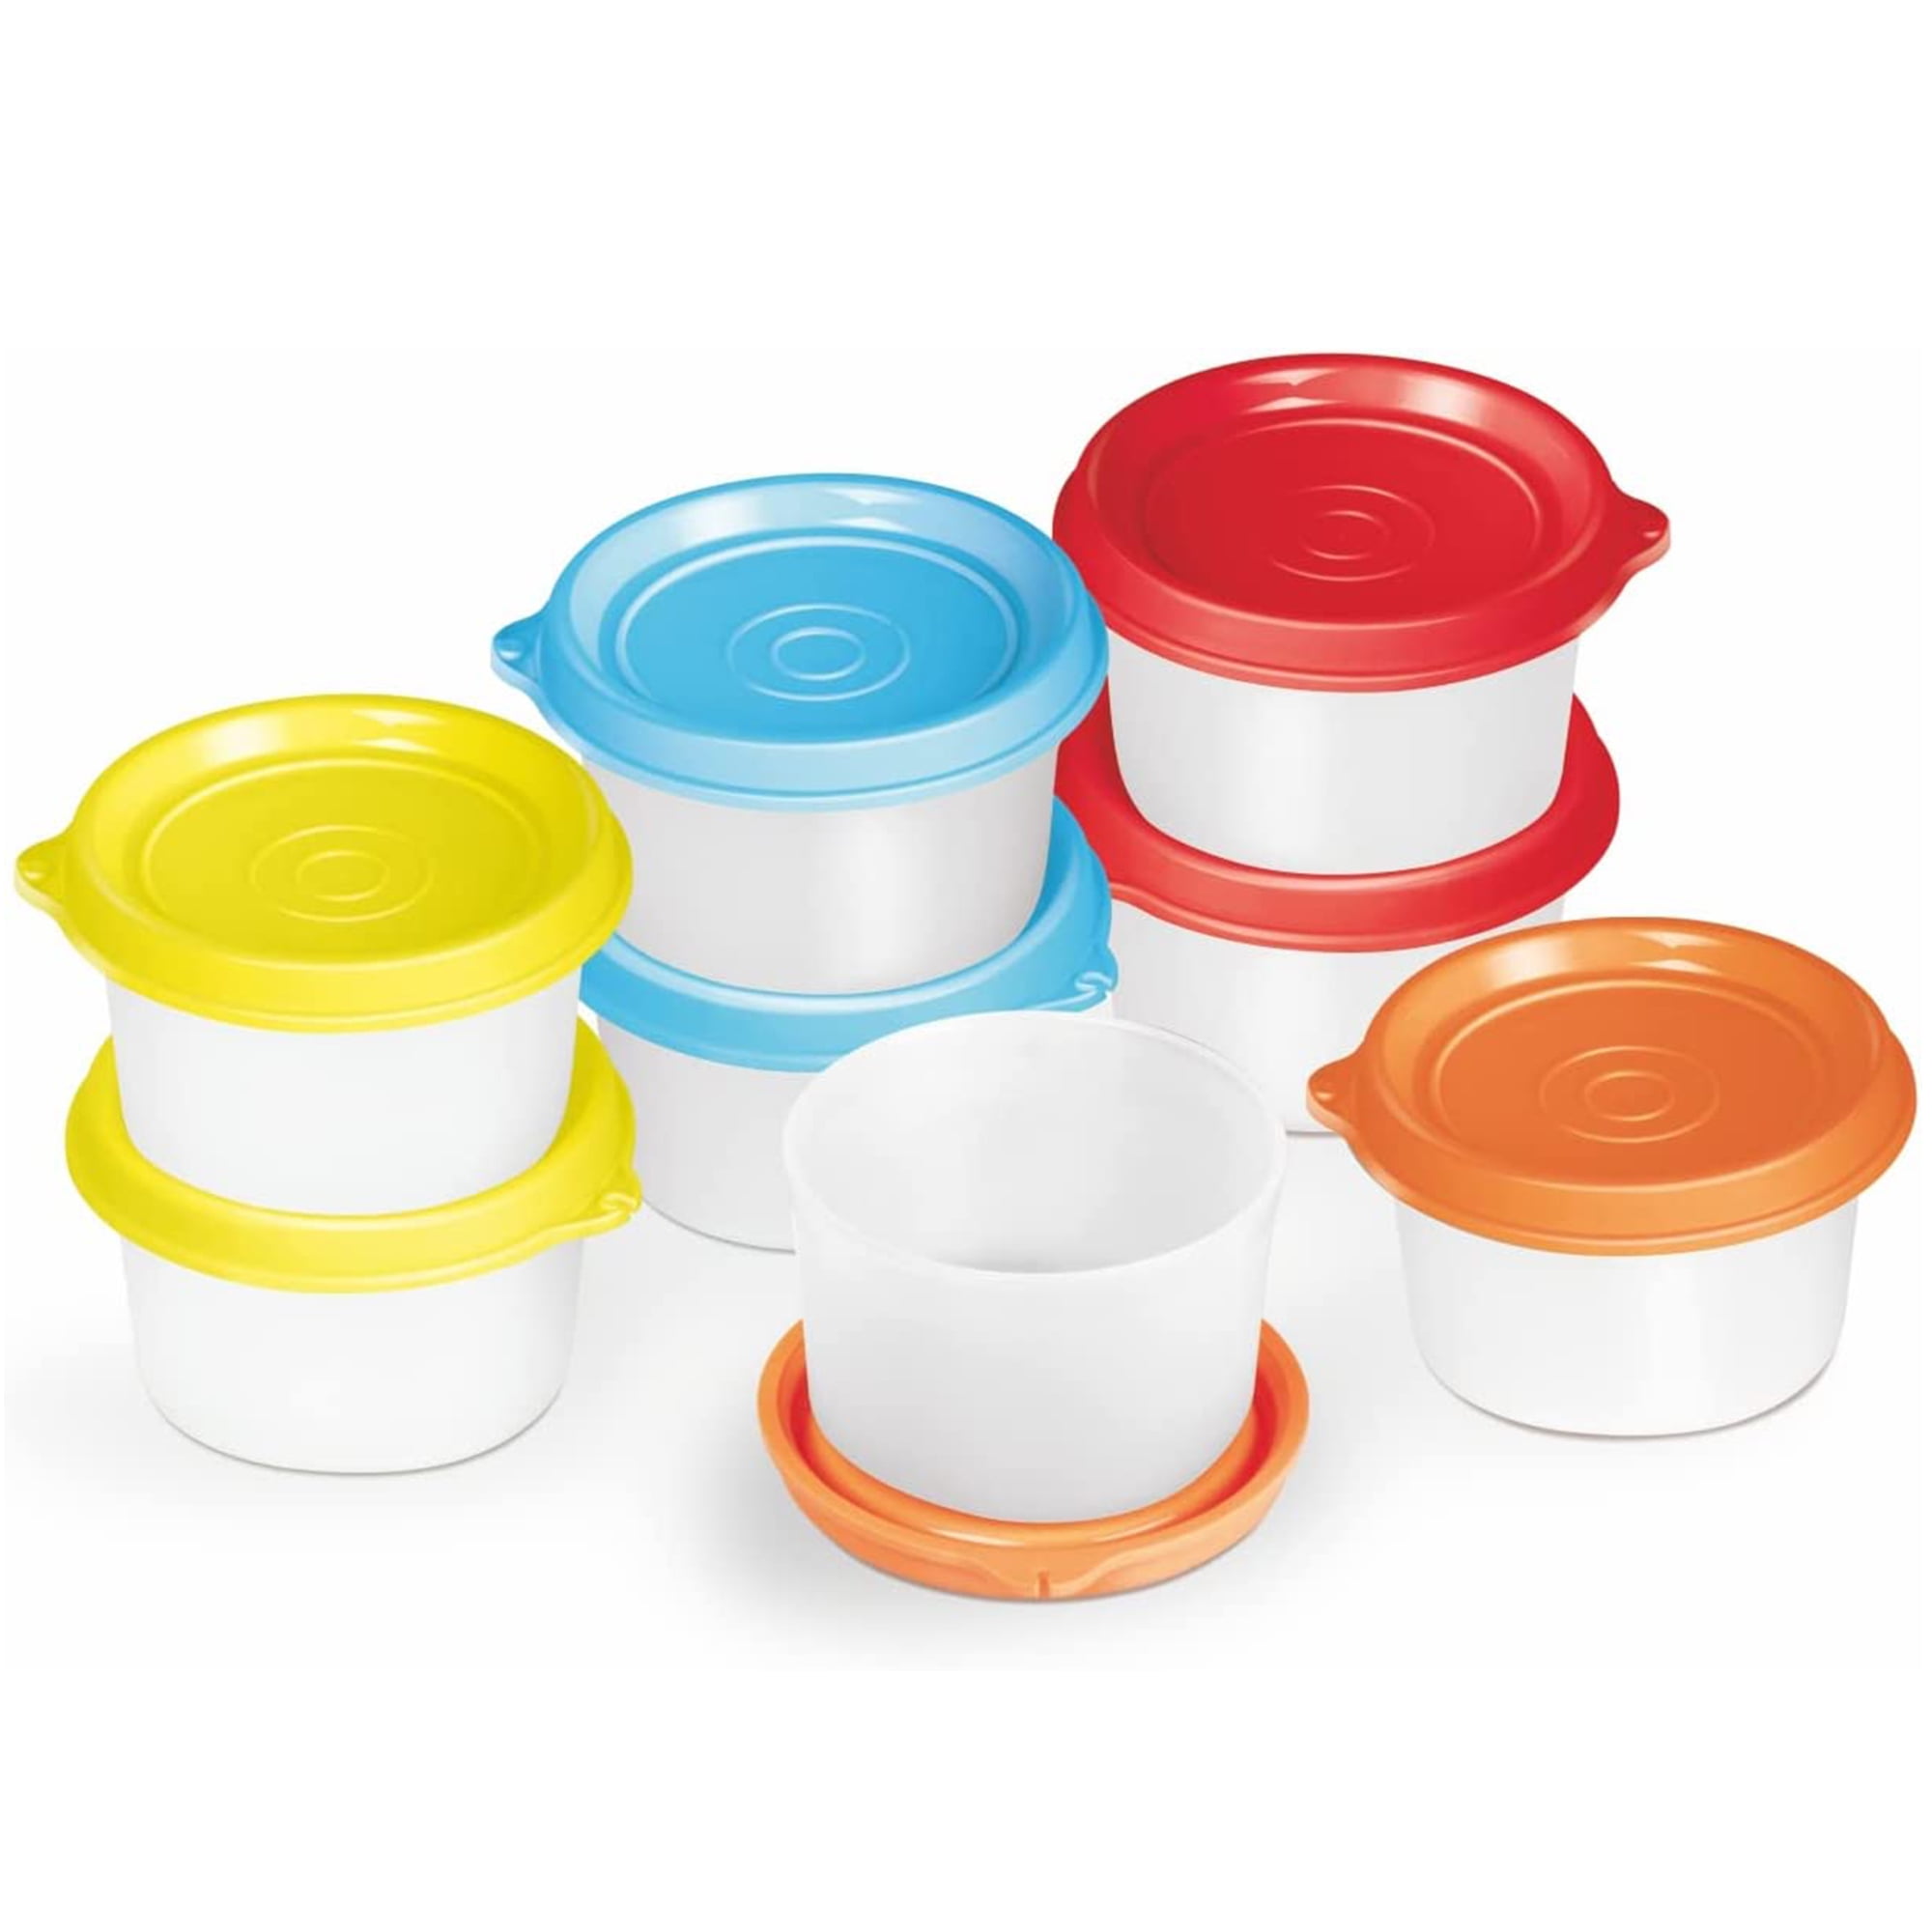 Milton Salad Dressing Containers with Lids Condiments, Sauce & Portion  Cups, 8-Pack 5 Oz Assorted Colors